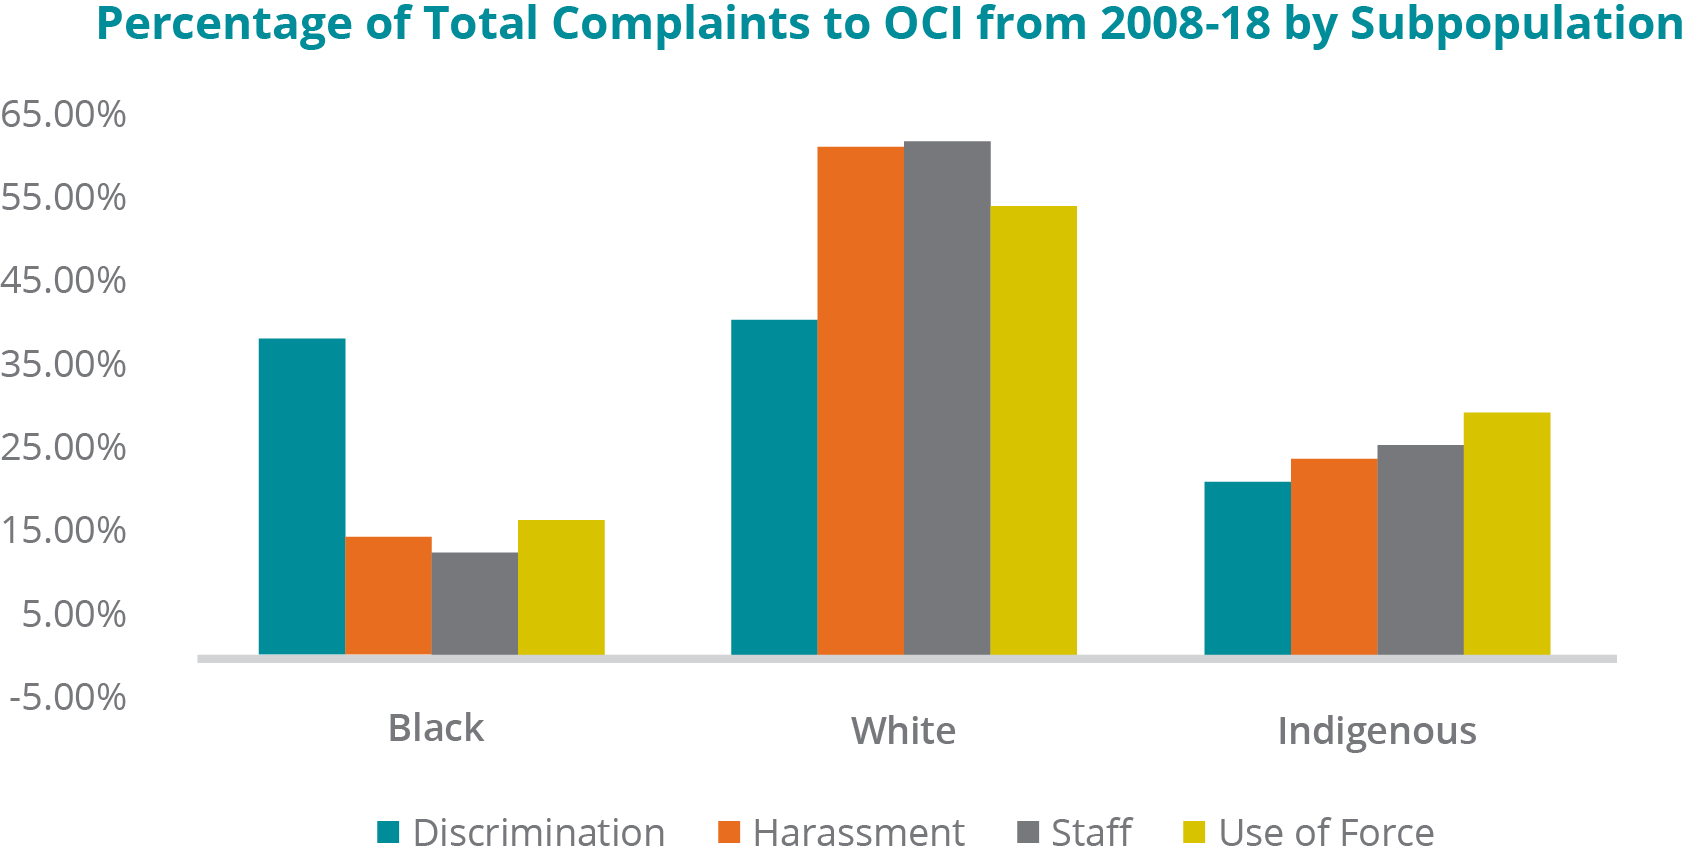 A graph depicting the percentage of specific types of complaints coming from particular ethnic subpopulations, from 2008 to 2018: -	Black inmates: 38.41% of Discrimination complaints; 14.48% of Harassment complaints; 12.50% of complaints about Staff; 16.38% of complaints about a Use of Force. -	White inmates: 40.58% of Discrimination complaints; 61.56% of Harassment complaints; 62.02% of complaints about Staff; 54.31% of complaints about a Use of Force. -	Indigenous inmates: 21.01% of Discrimination complaints; 23.96% of Harassment complaints; 25.48% of complaints about Staff; 29.31% of complaints about a Use of Force.